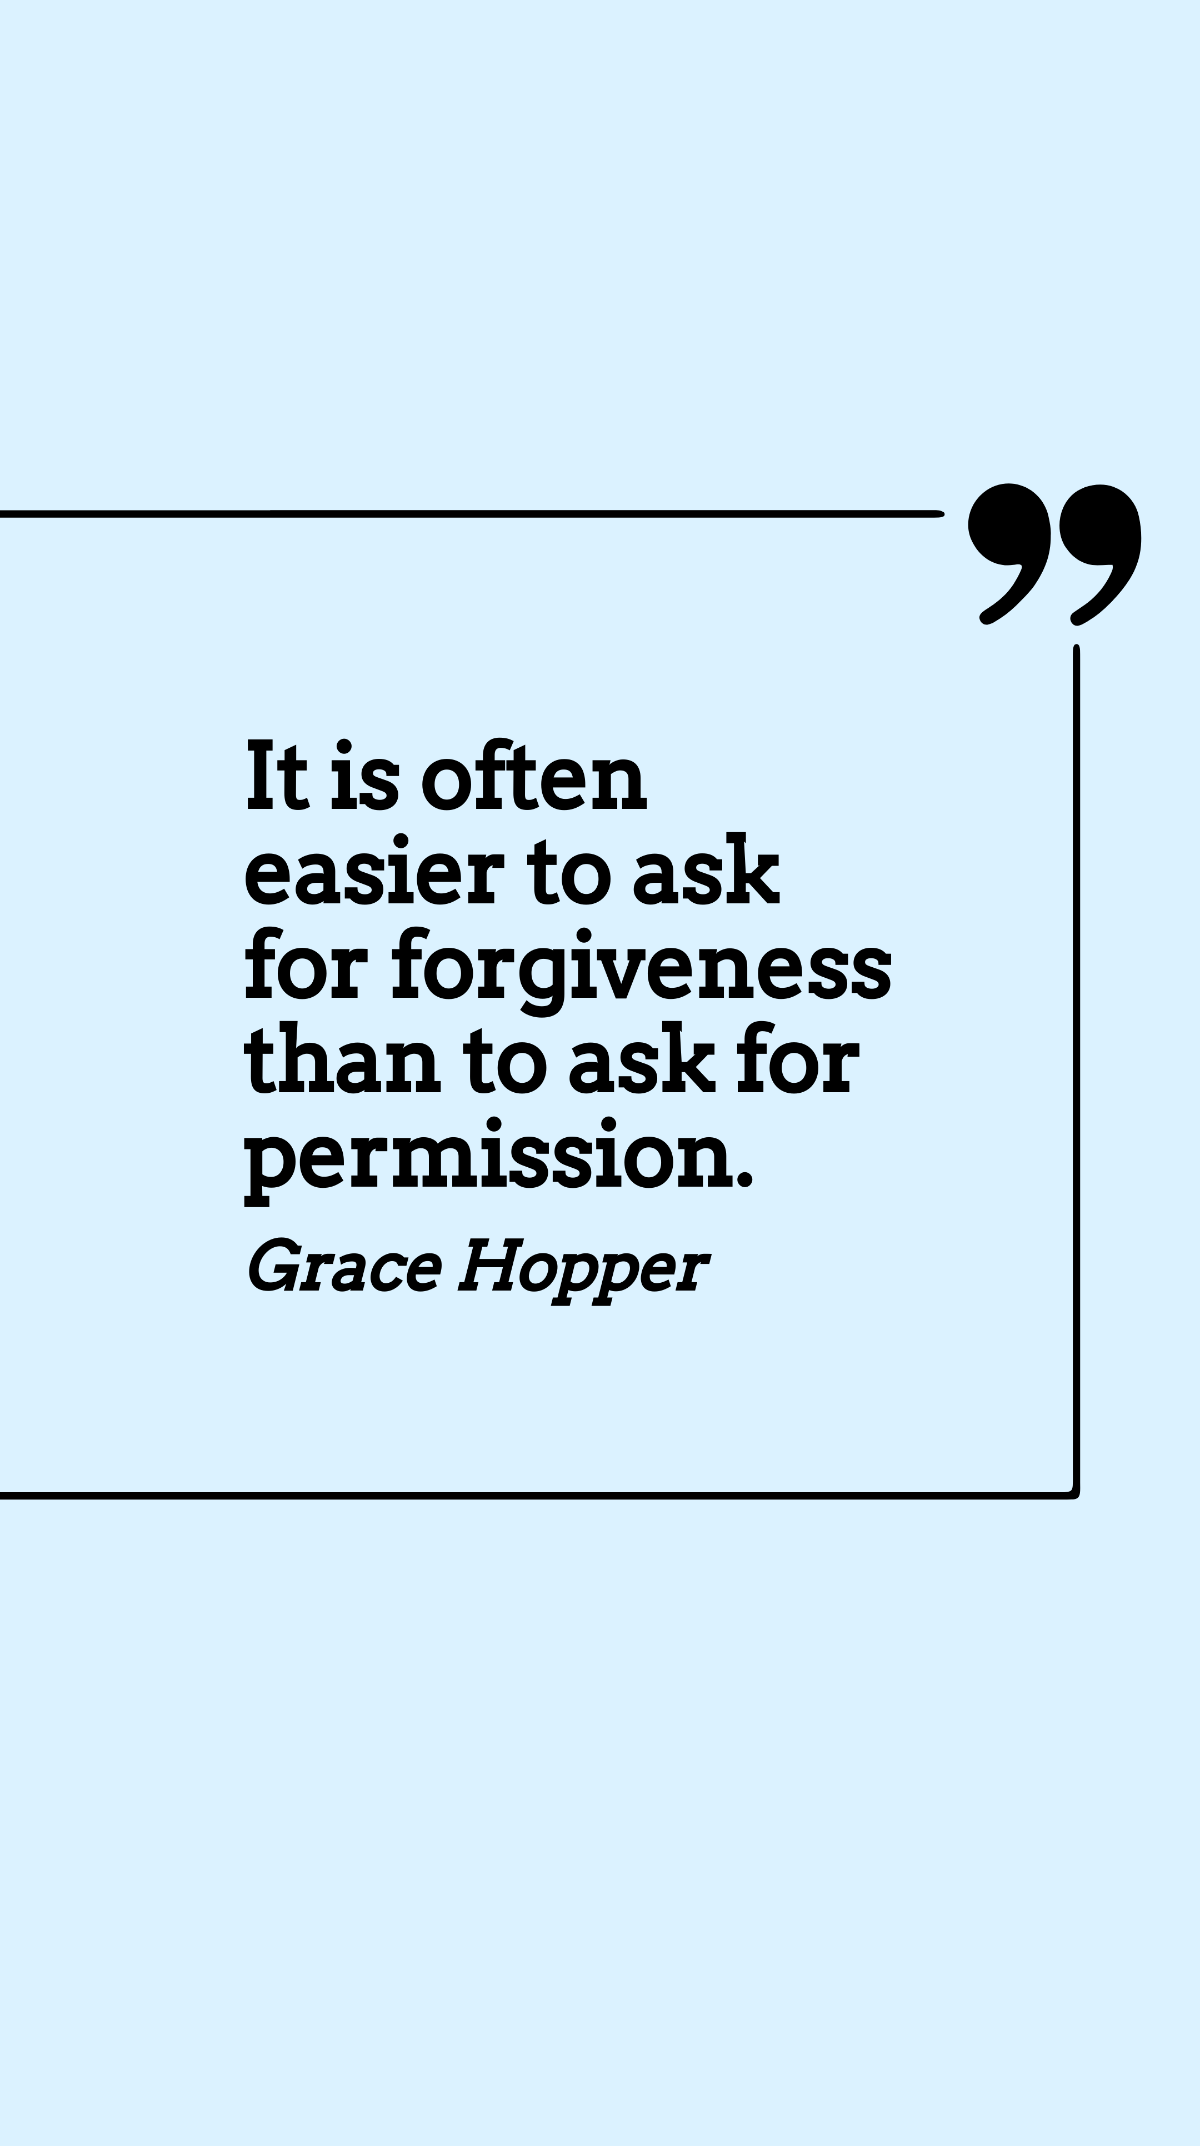 Free Grace Hopper - It is often easier to ask for forgiveness than to ask for permission. Template